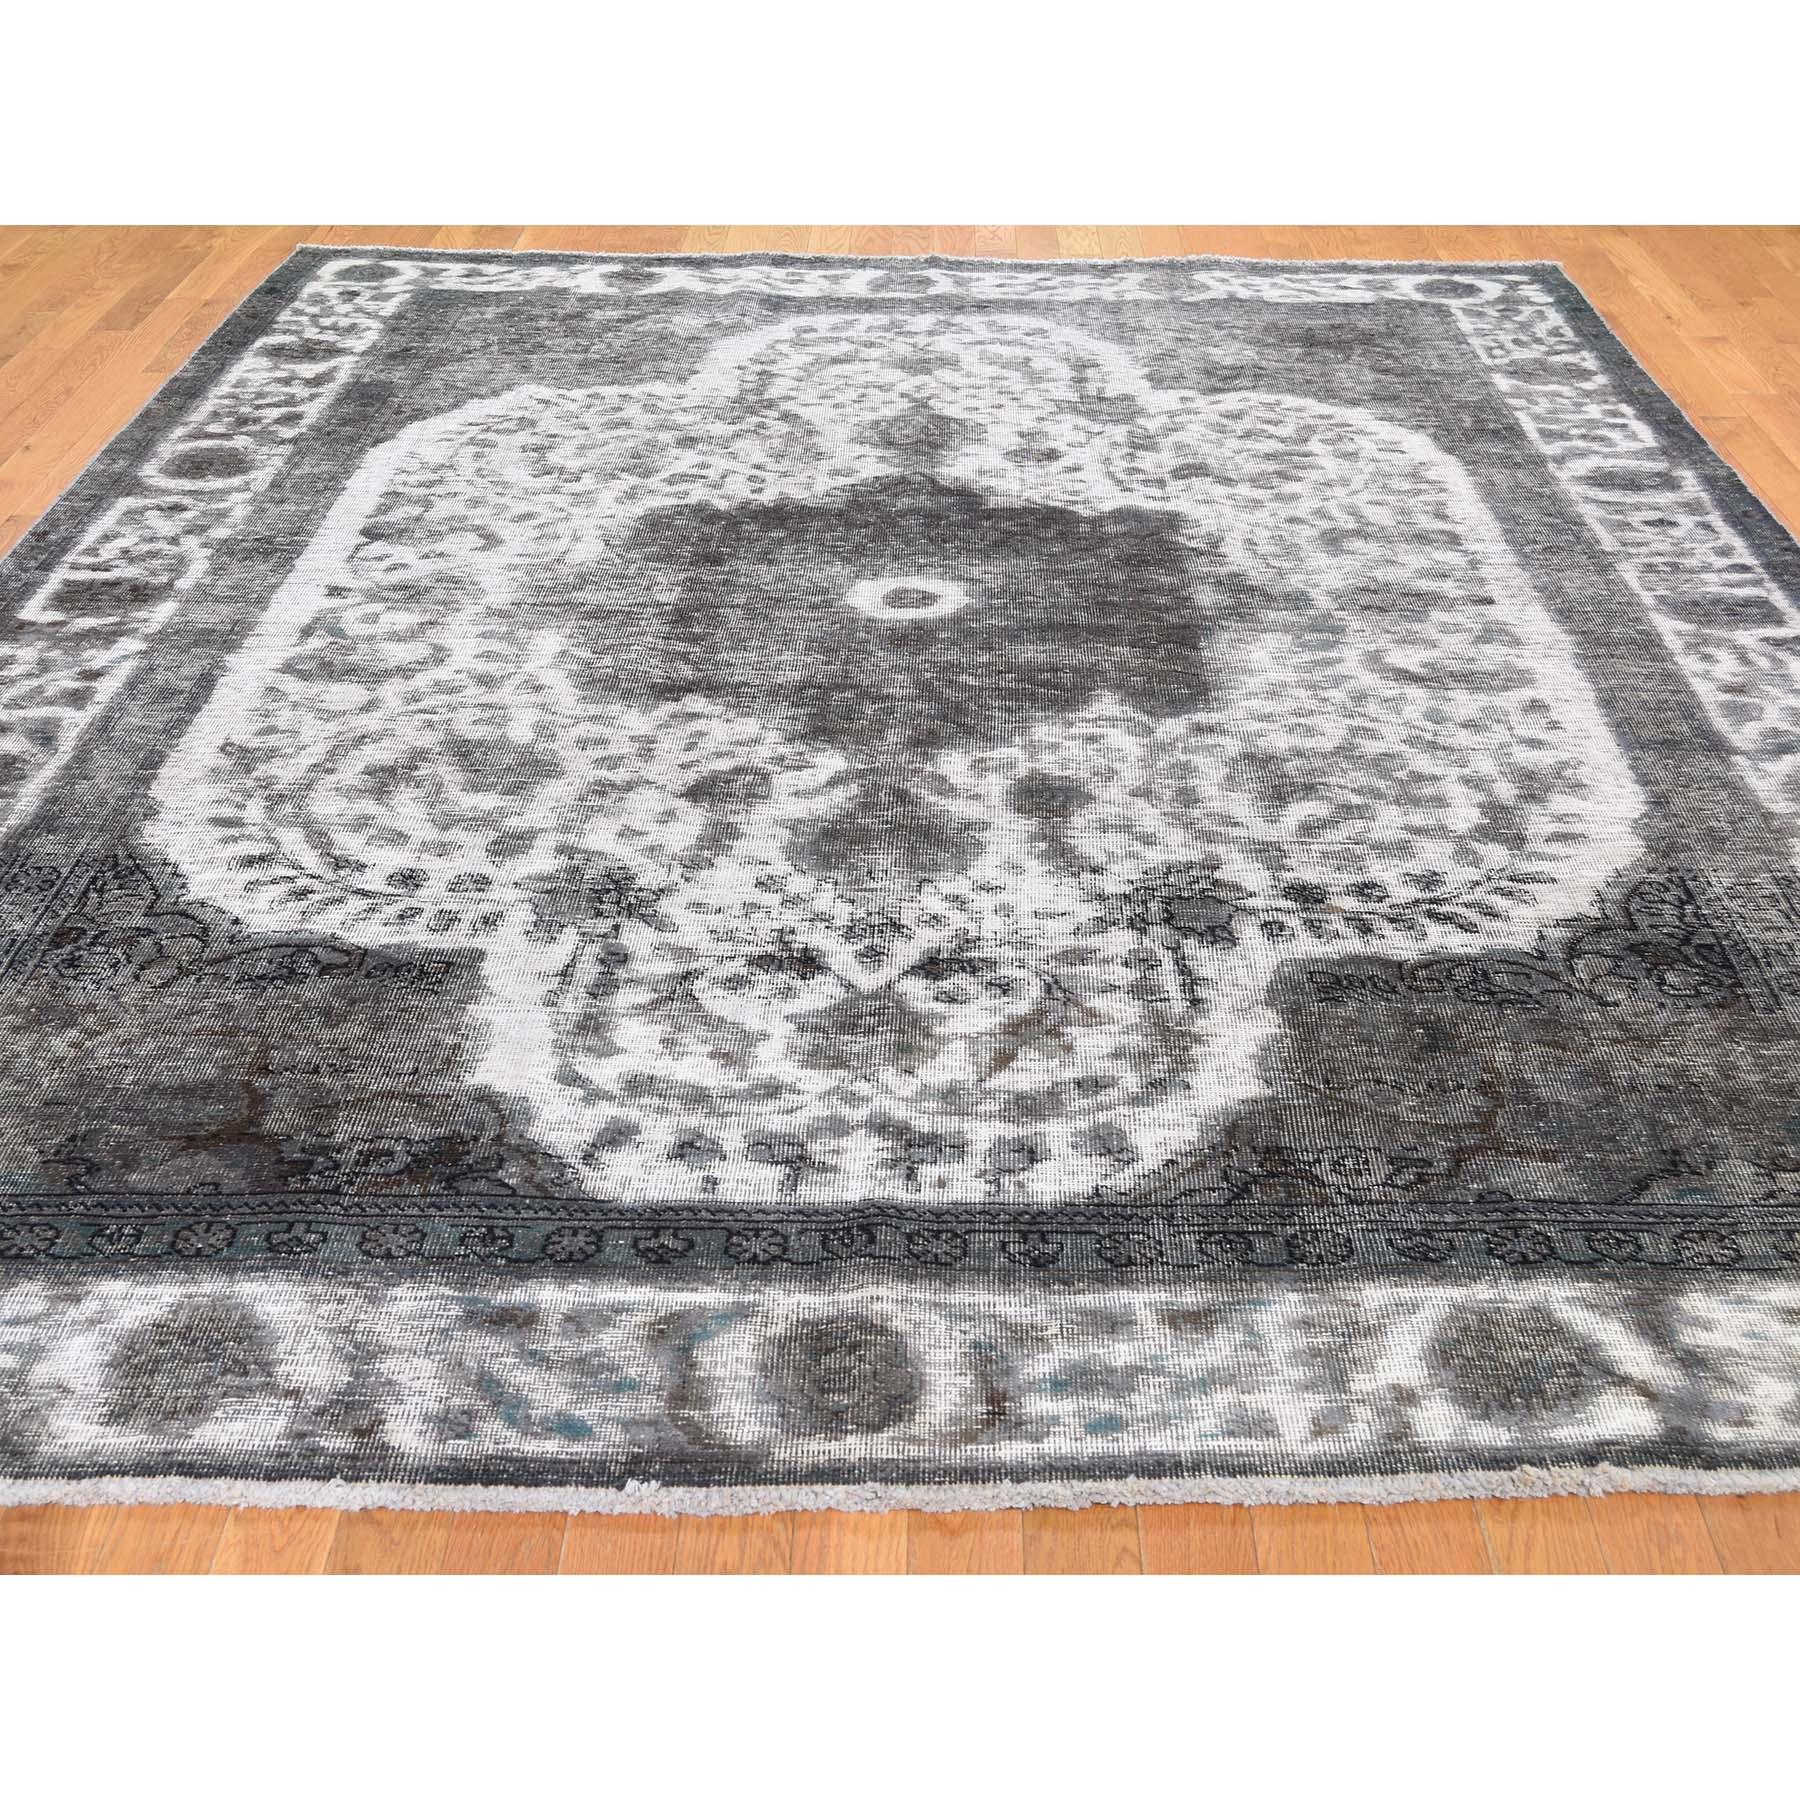 Afghan Pure Wool Vintage Persian Tabriz Hi-Low Pile Overdyed Hand Knotted Rug